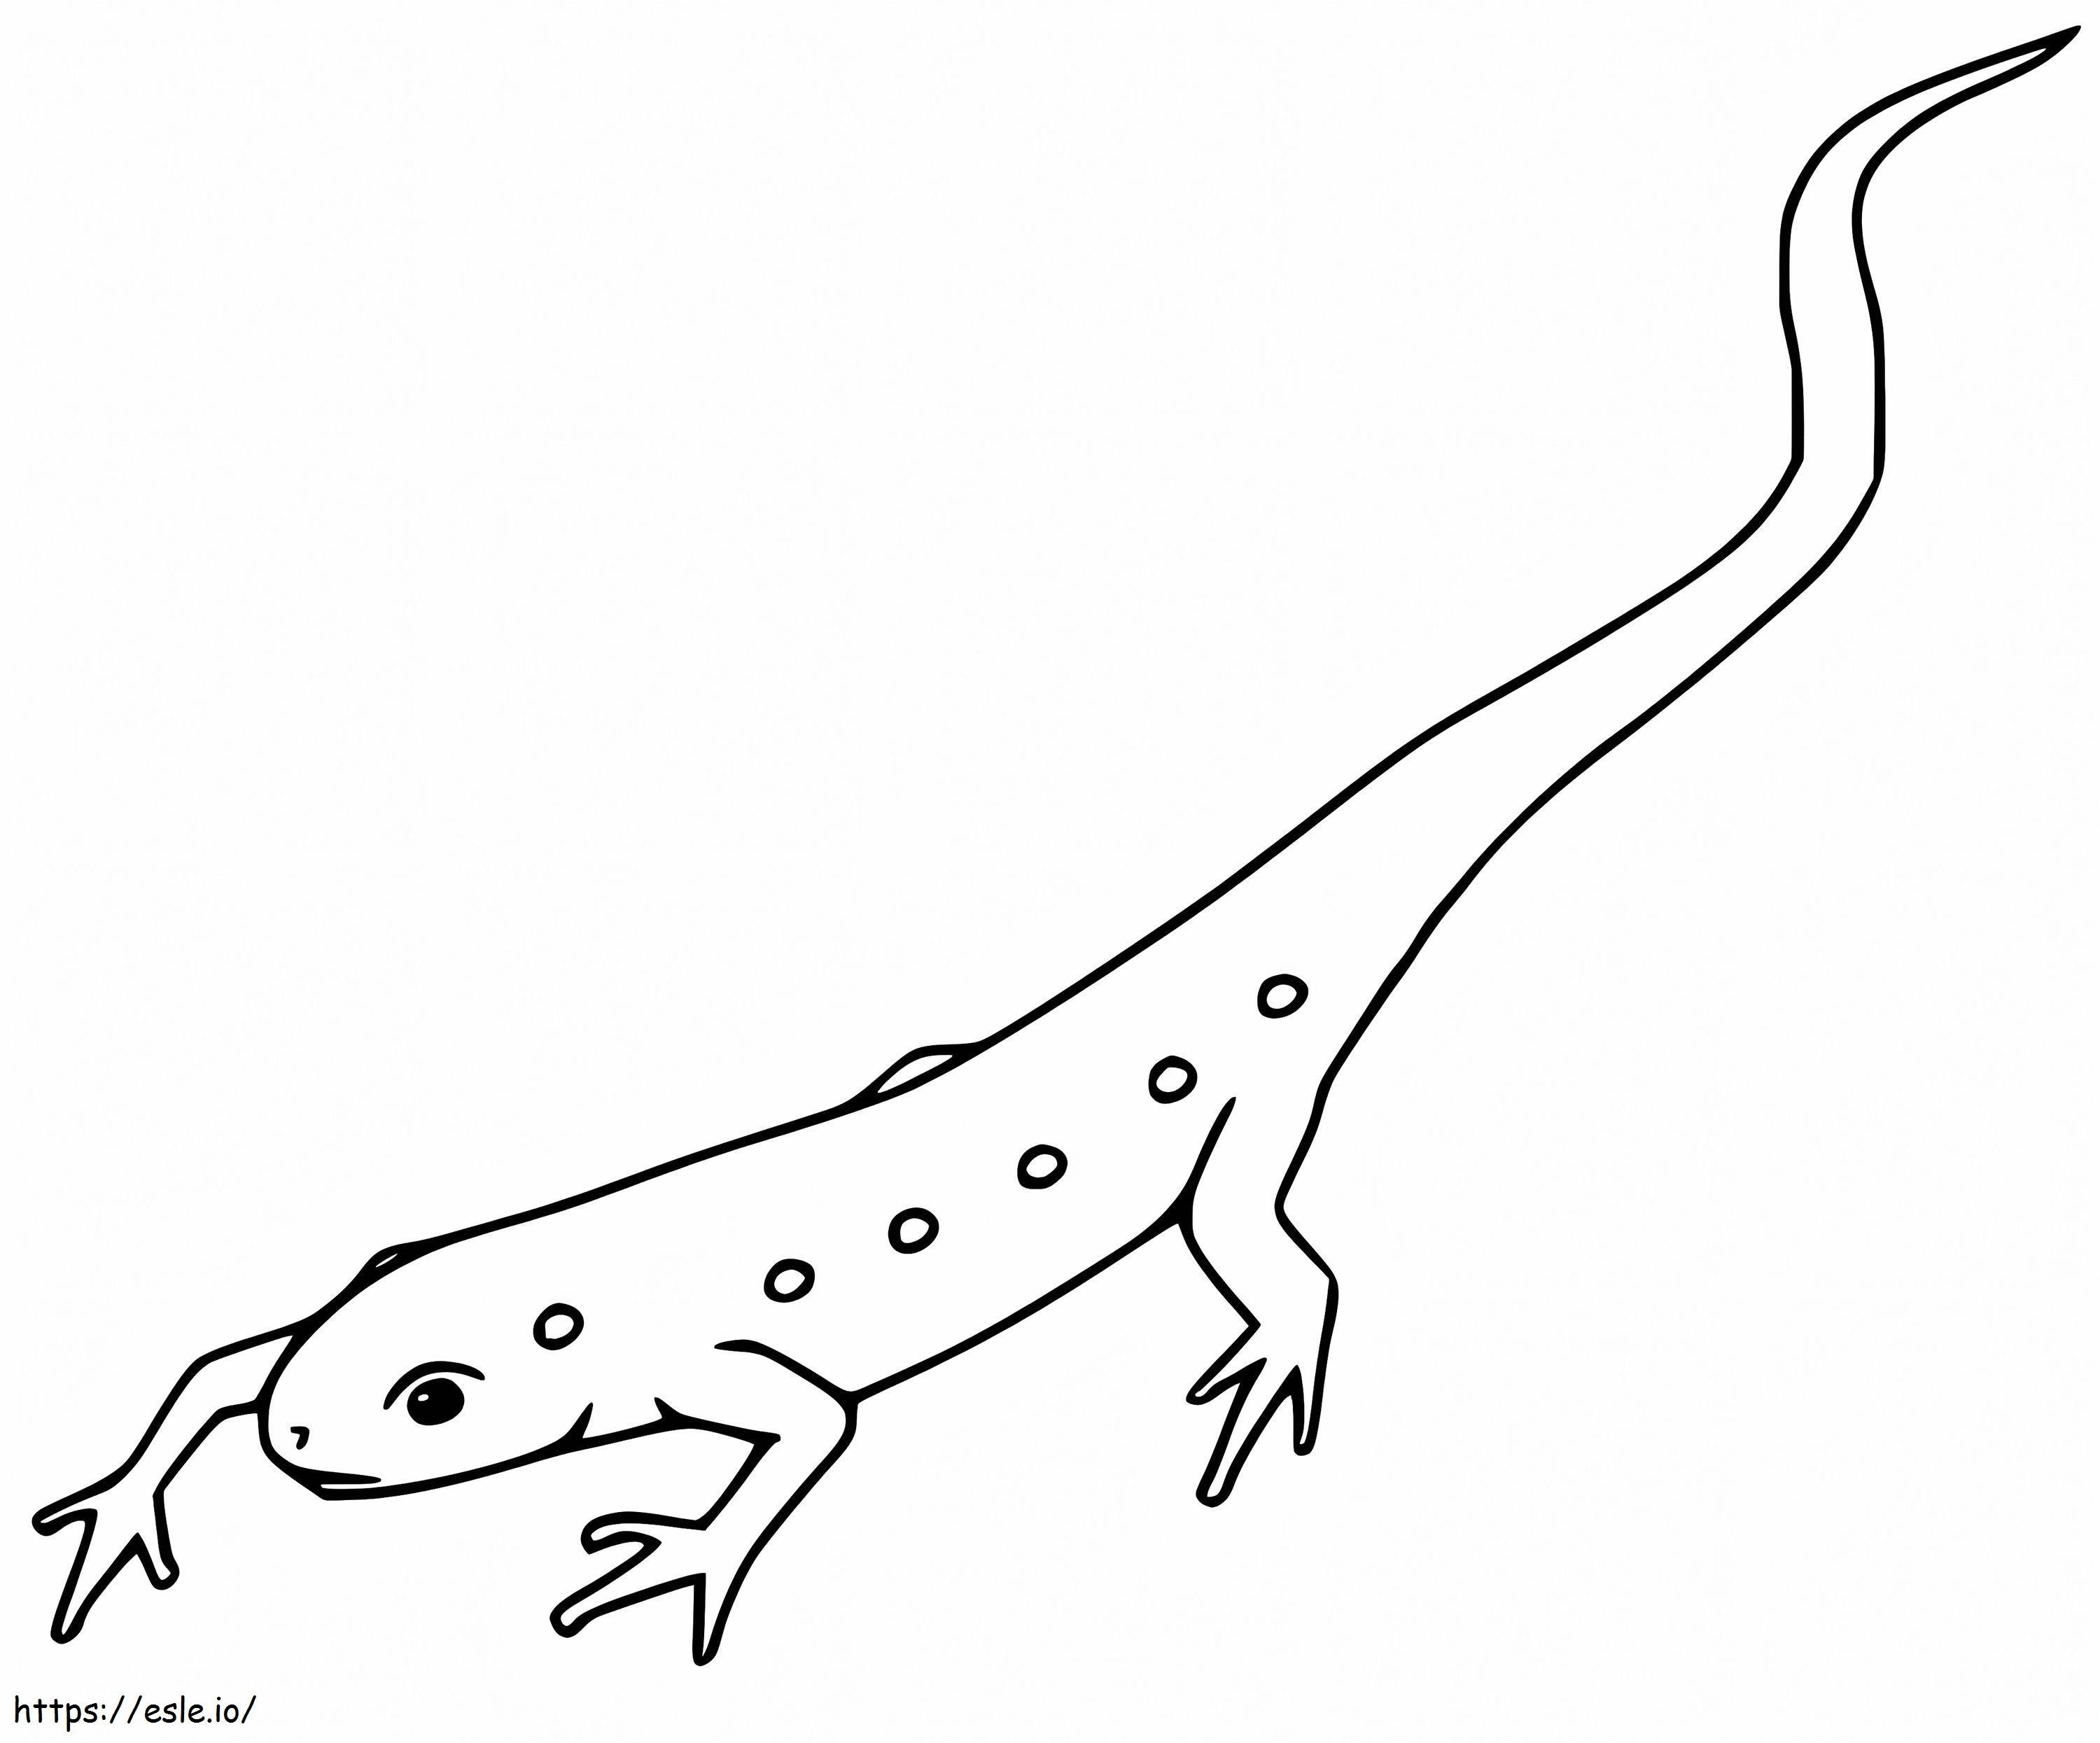 Red Spotted Newt 1 coloring page